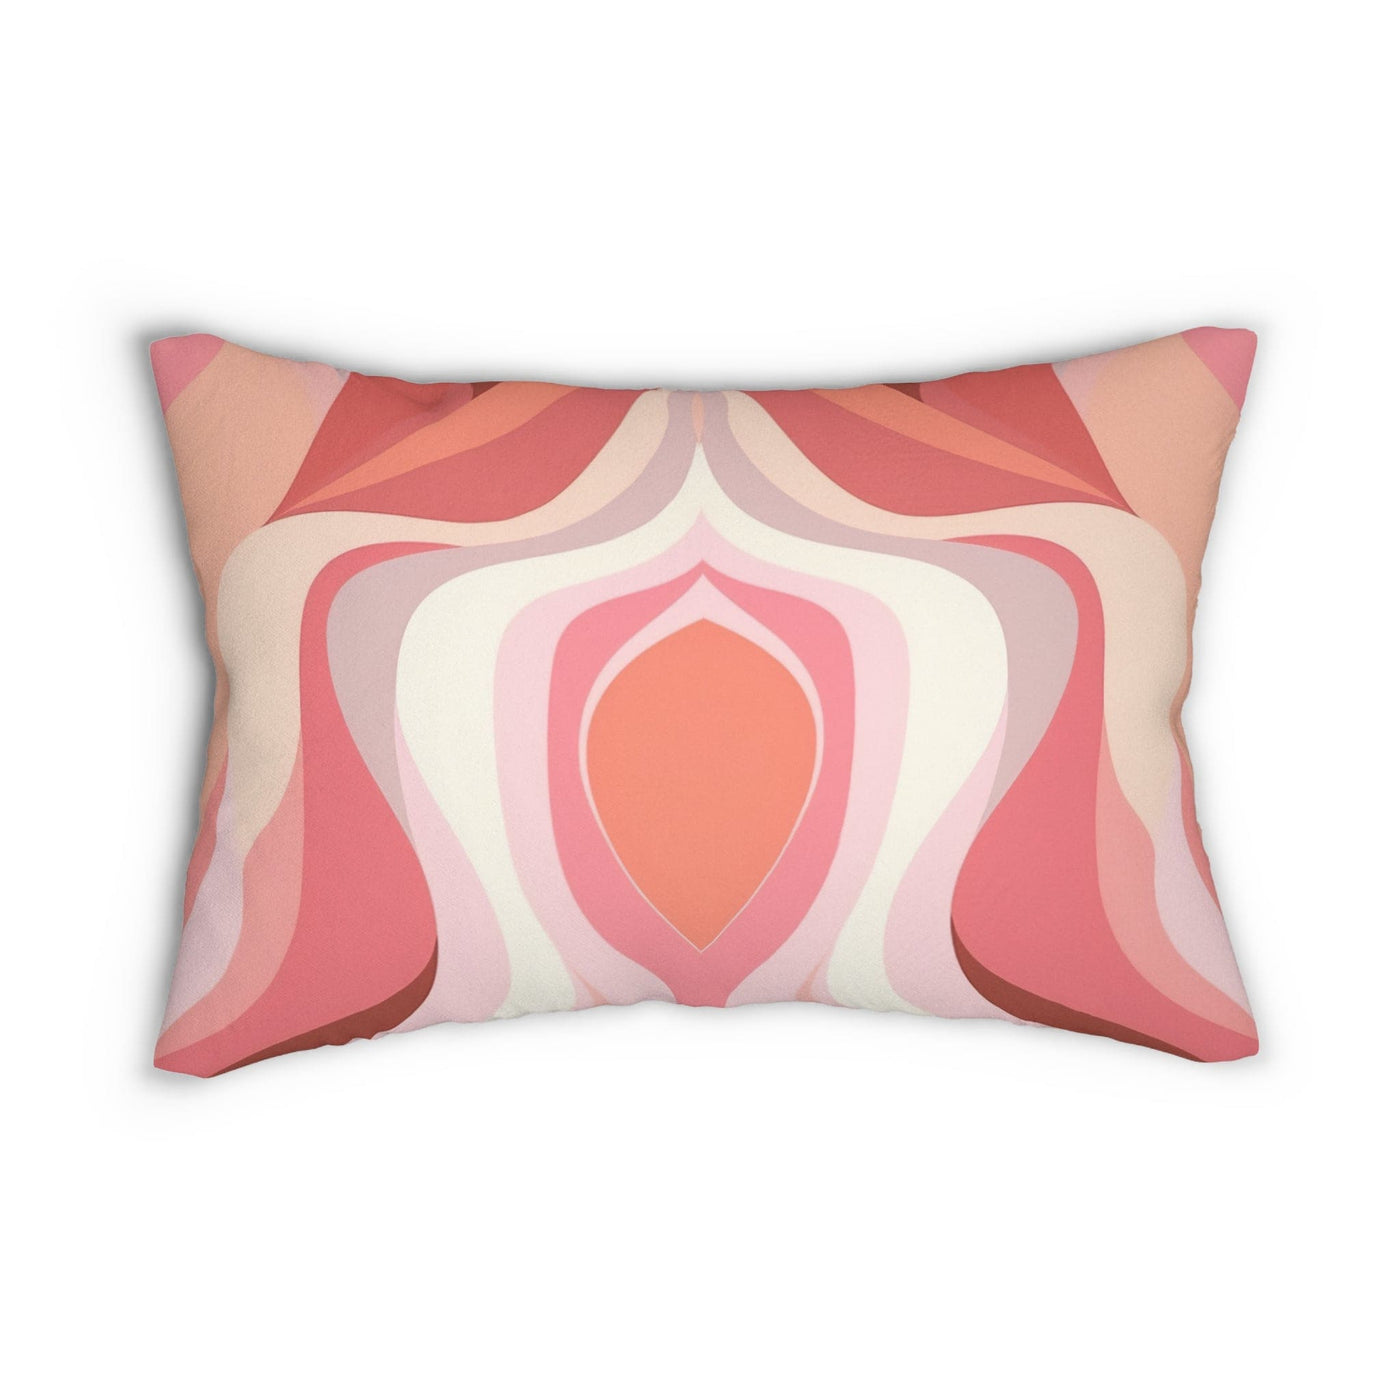 Decorative Lumbar Throw Pillow - Boho Pink And White Contemporary Art Lined